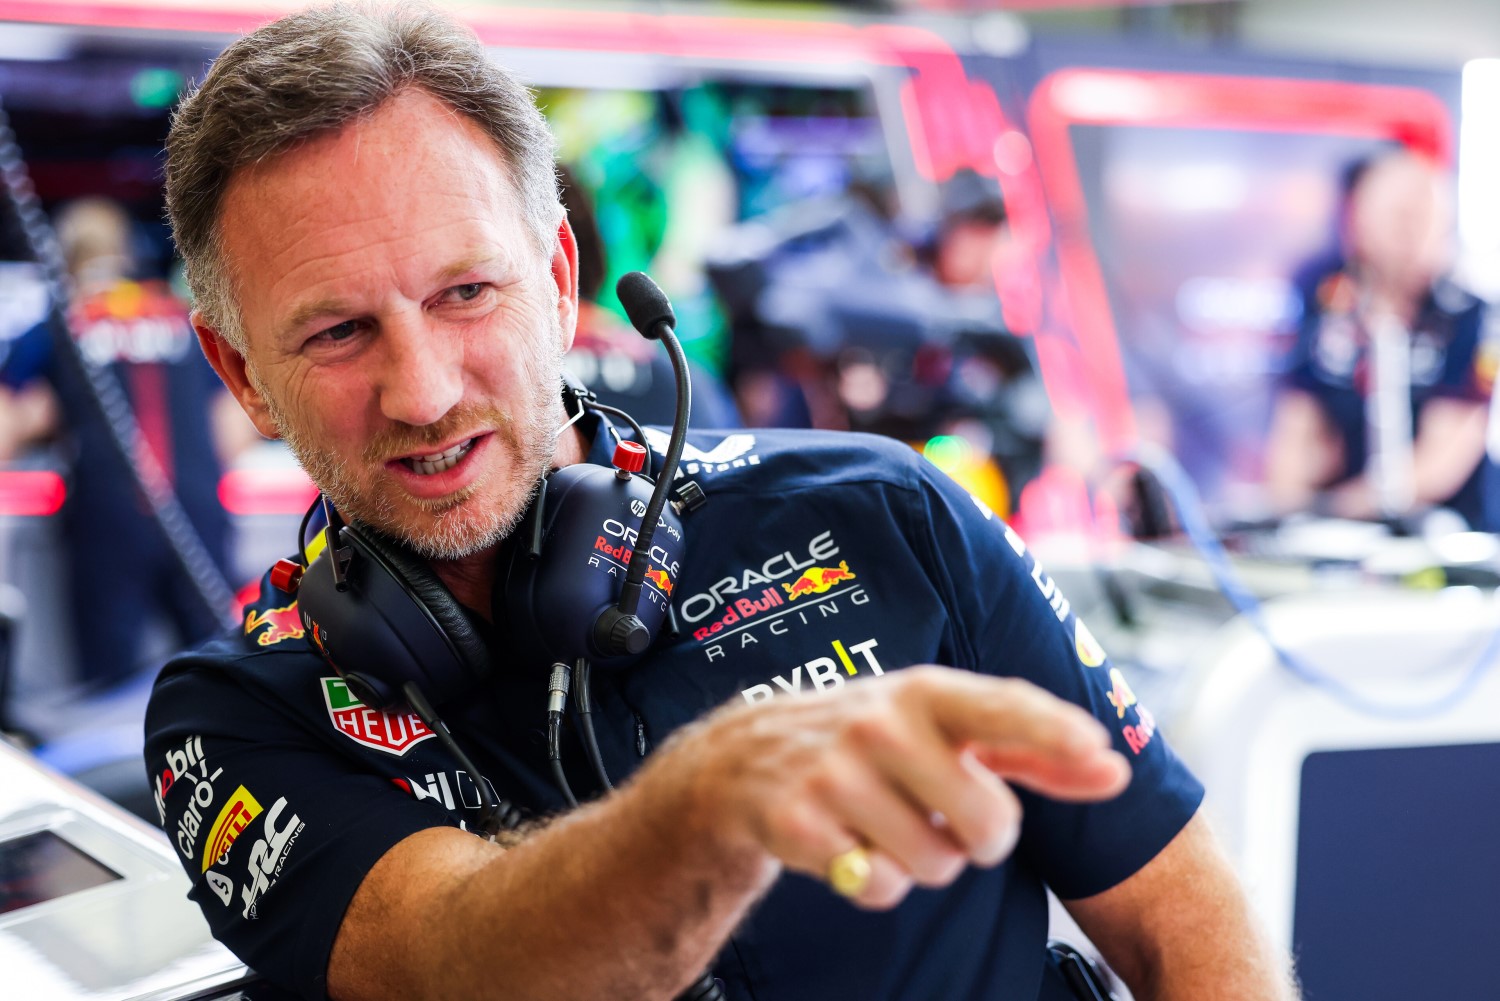 Red Bull Racing Team Principal Christian Horner looks on in the garage during practice ahead of the F1 Grand Prix of Bahrain at Bahrain International Circuit on March 03, 2023 in Bahrain, Bahrain. (Photo by Mark Thompson/Getty Images) // Getty Images / Red Bull Content Pool